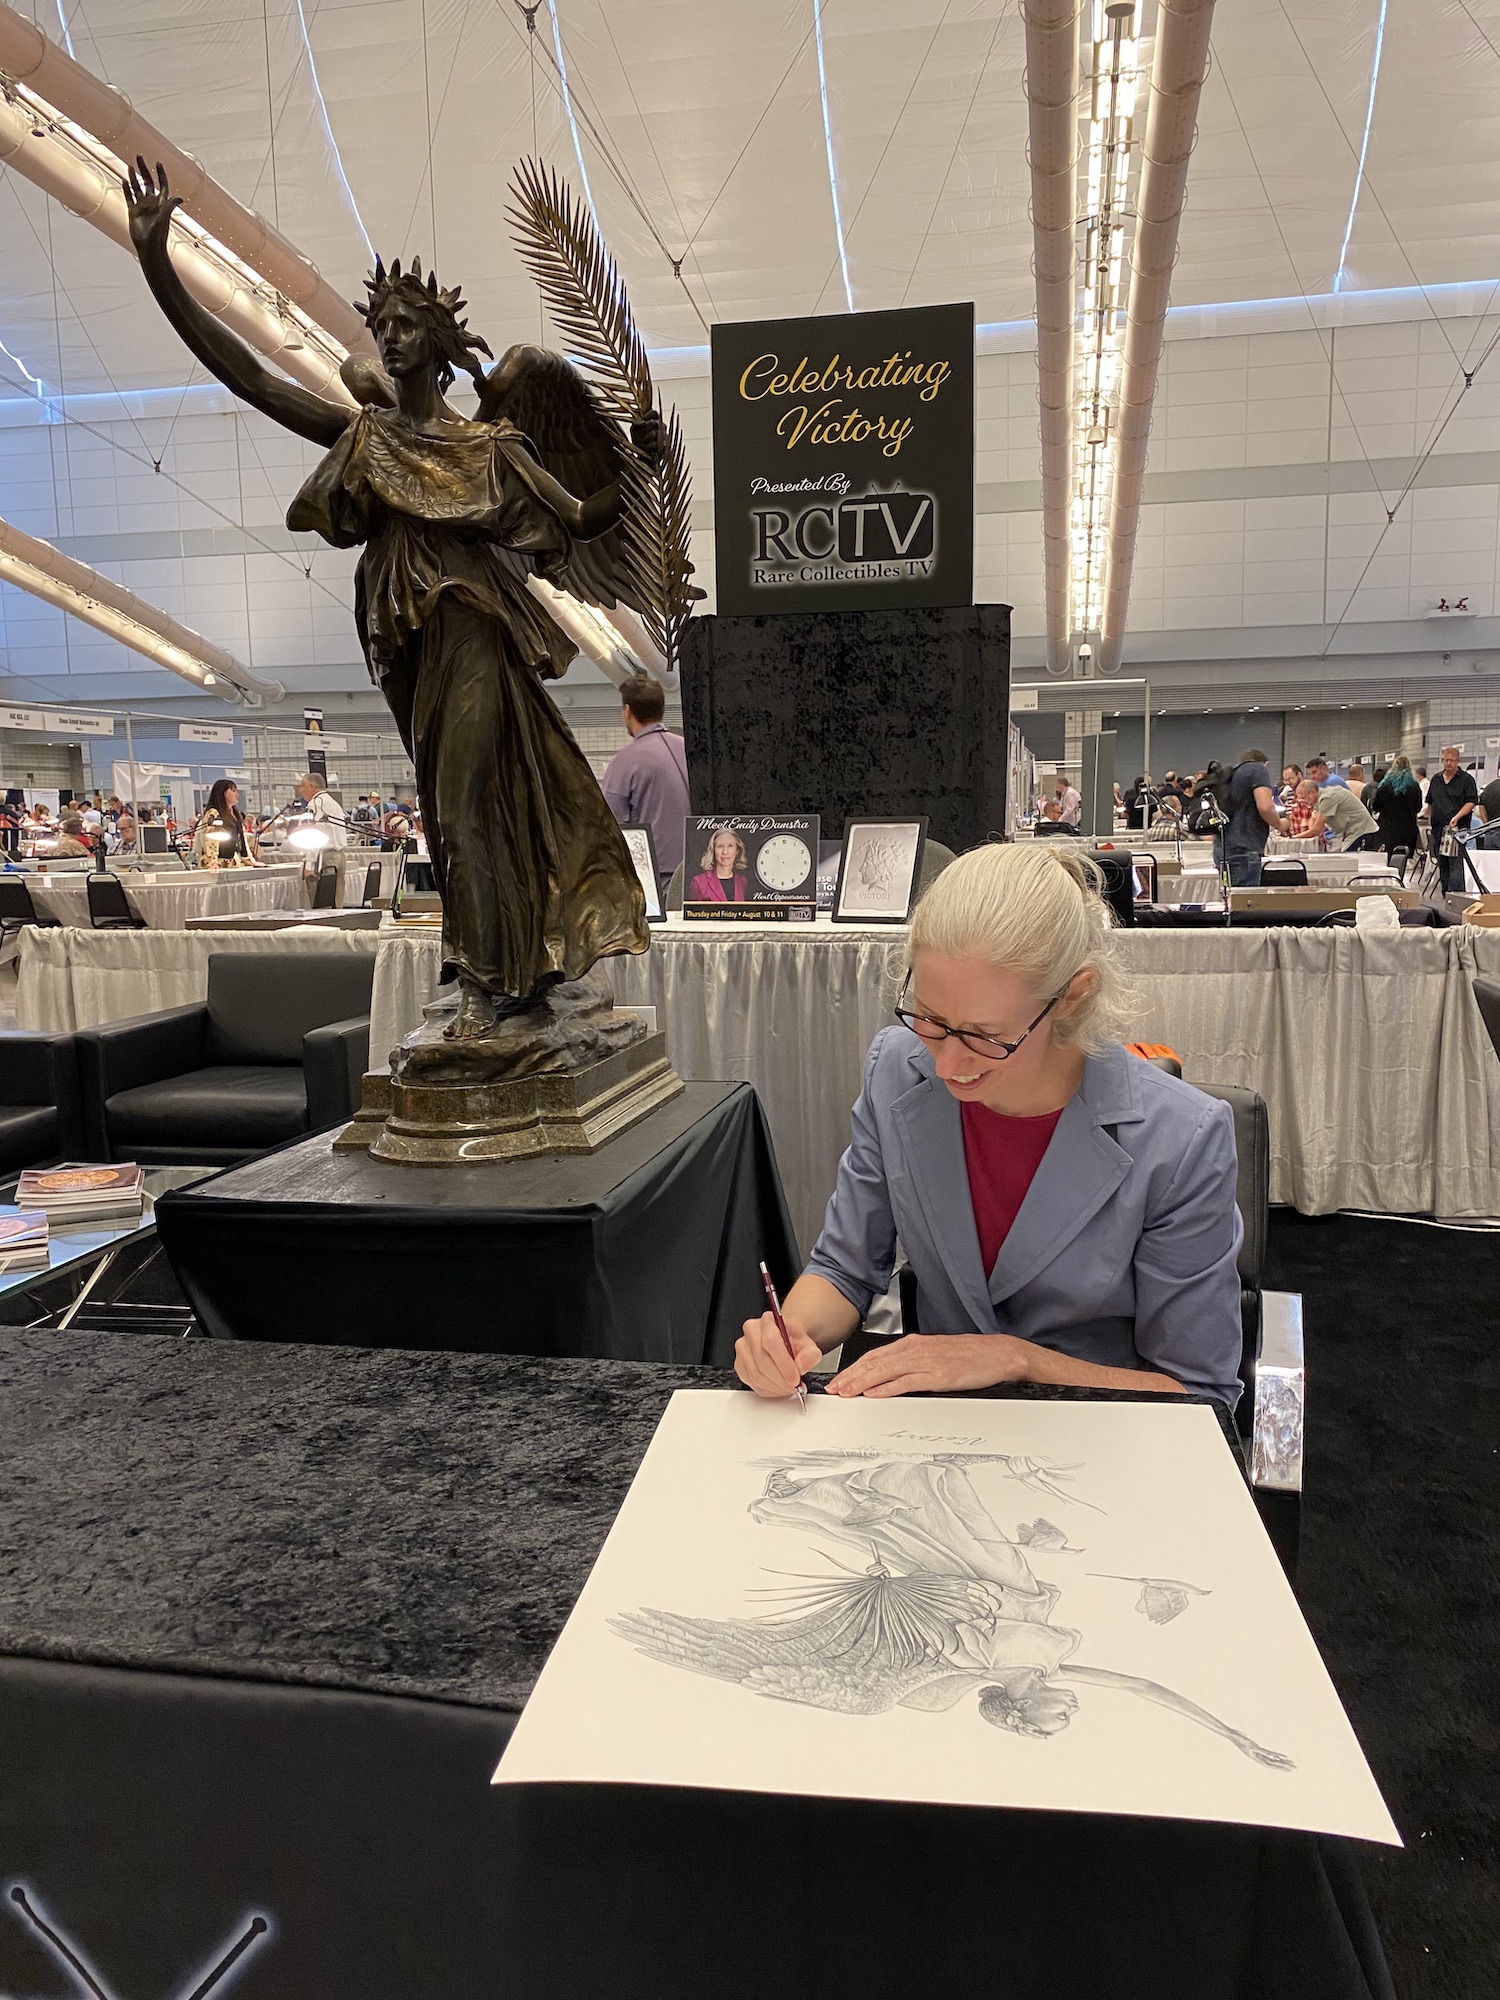 Photo of Emily signing large print in front of Victory sculpture